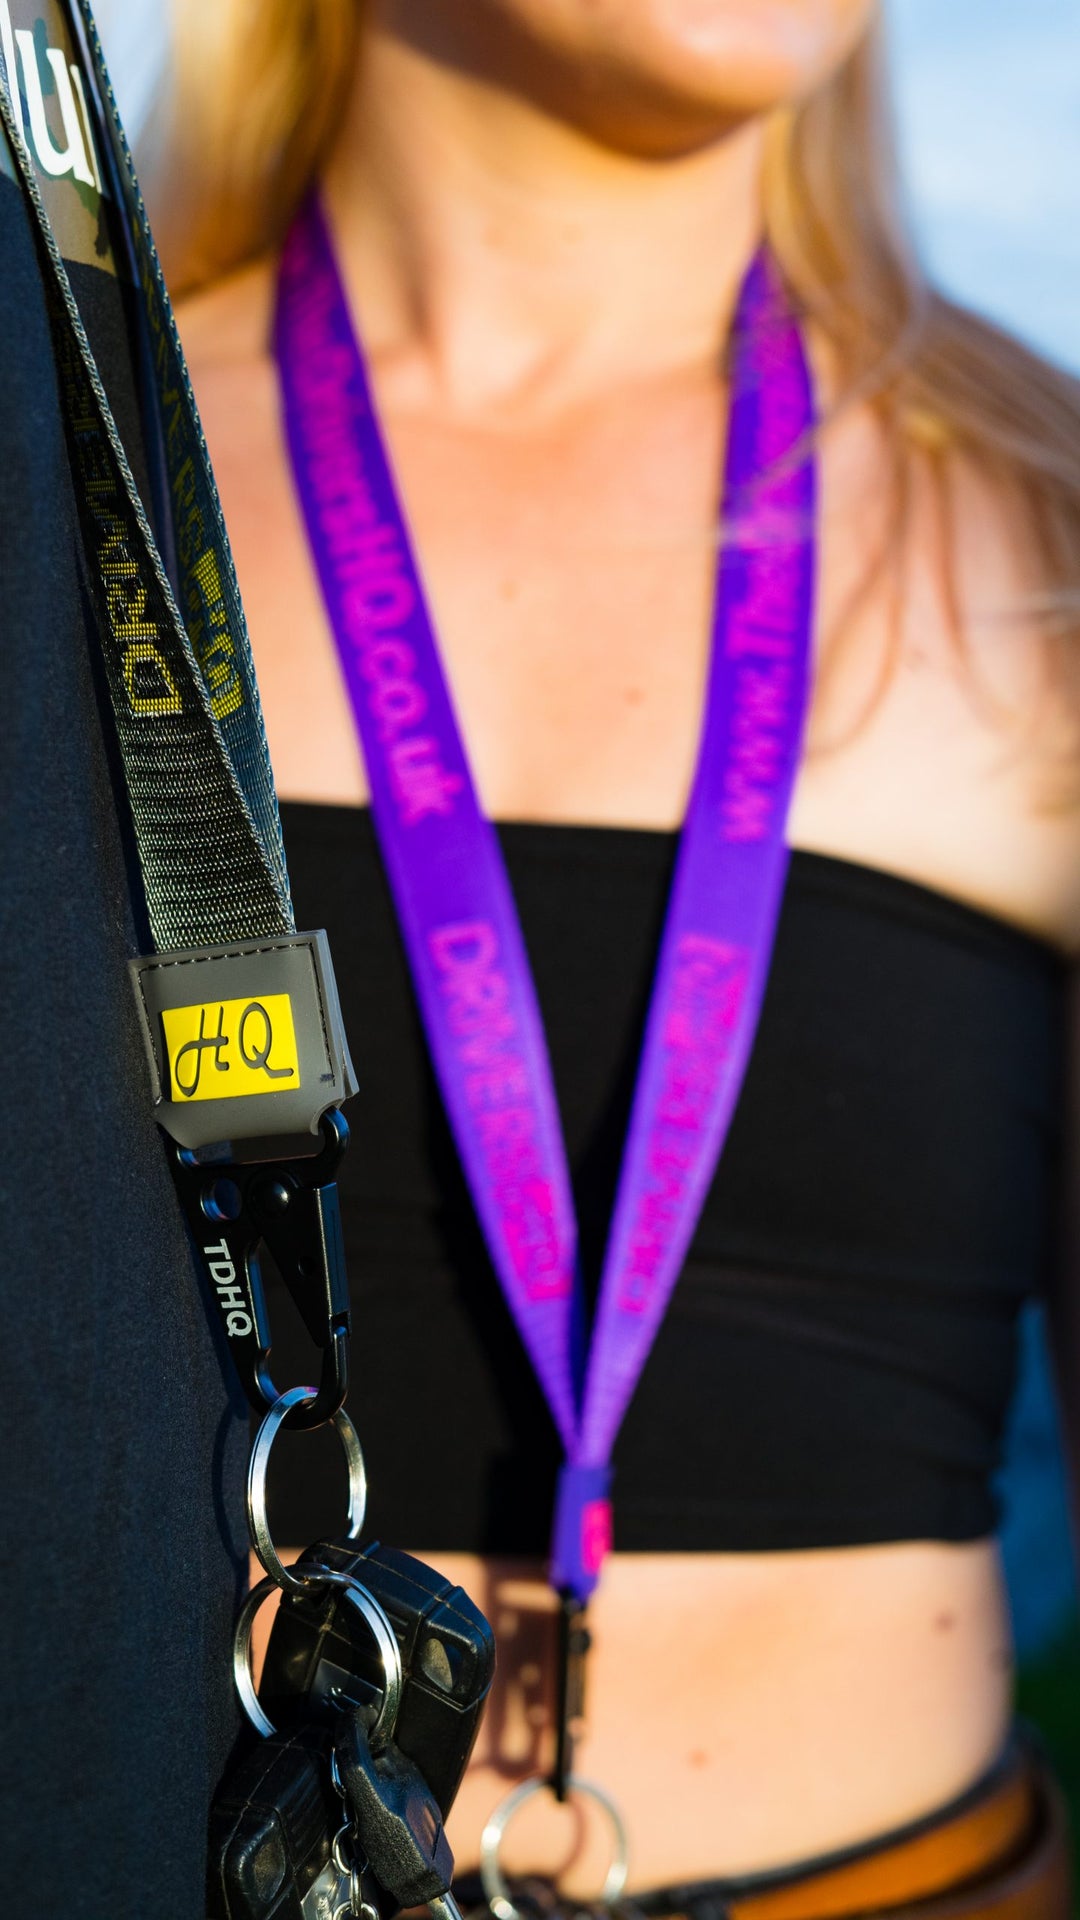 THE DRIVERS HQ WOVEN PREMIUM LANYARDS